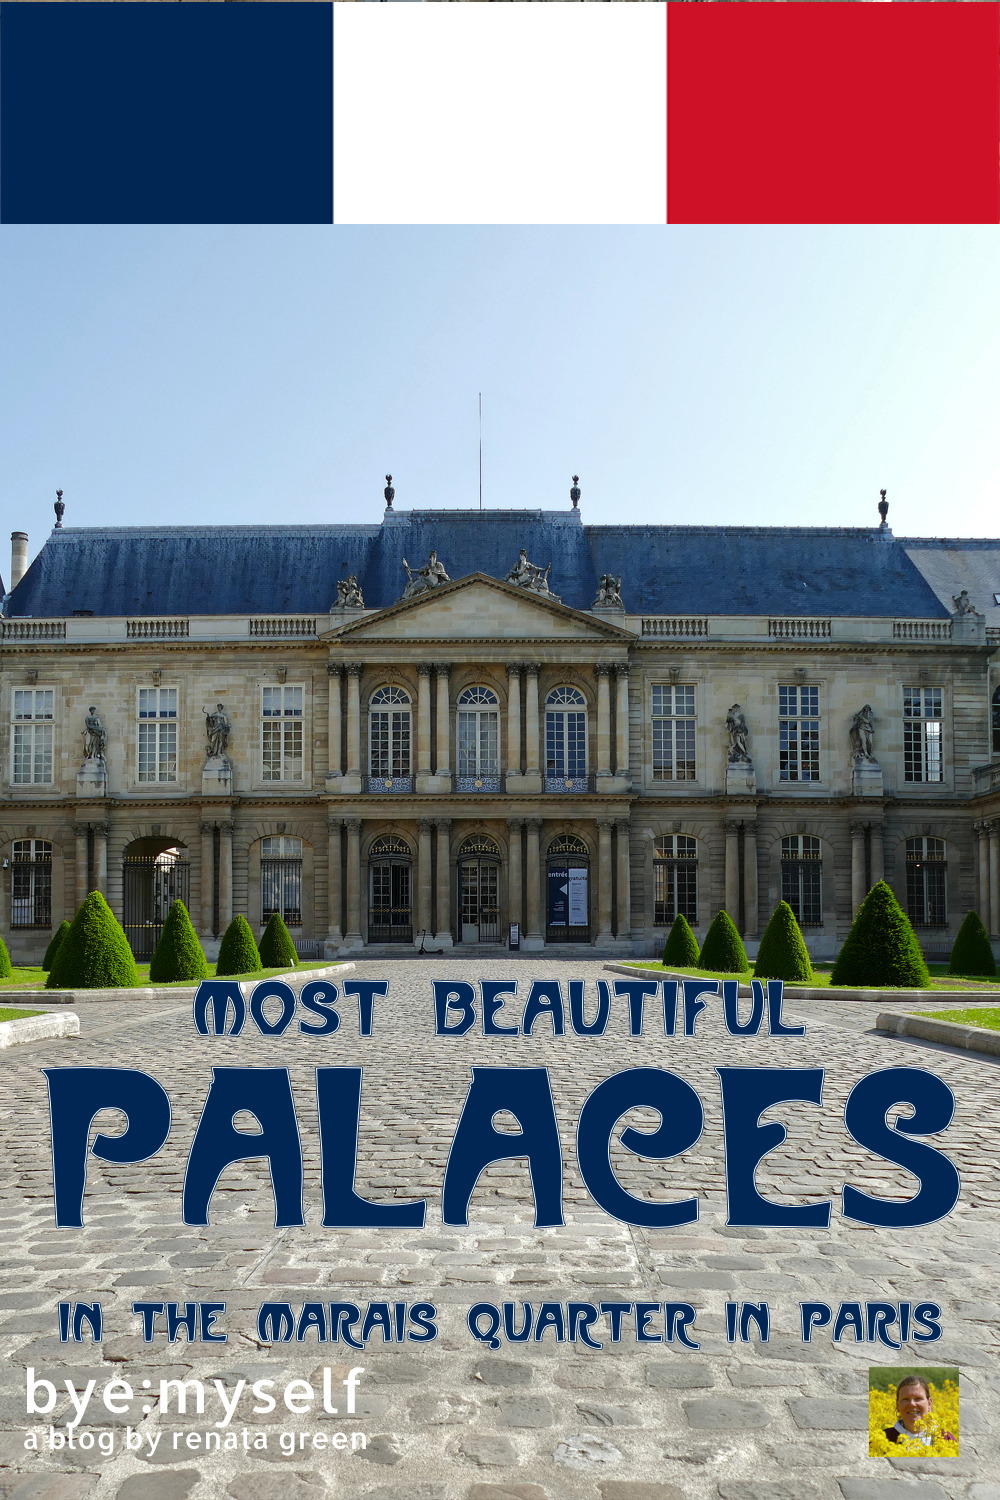 In this post, I'm inviting you on a stroll that will take us to the ten most beautiful palaces in the Marais Neighborhood of Paris. #marais #lemarais #paris #france #palaces #mansions #architecture #art #arttrip #artwalk #byemyself